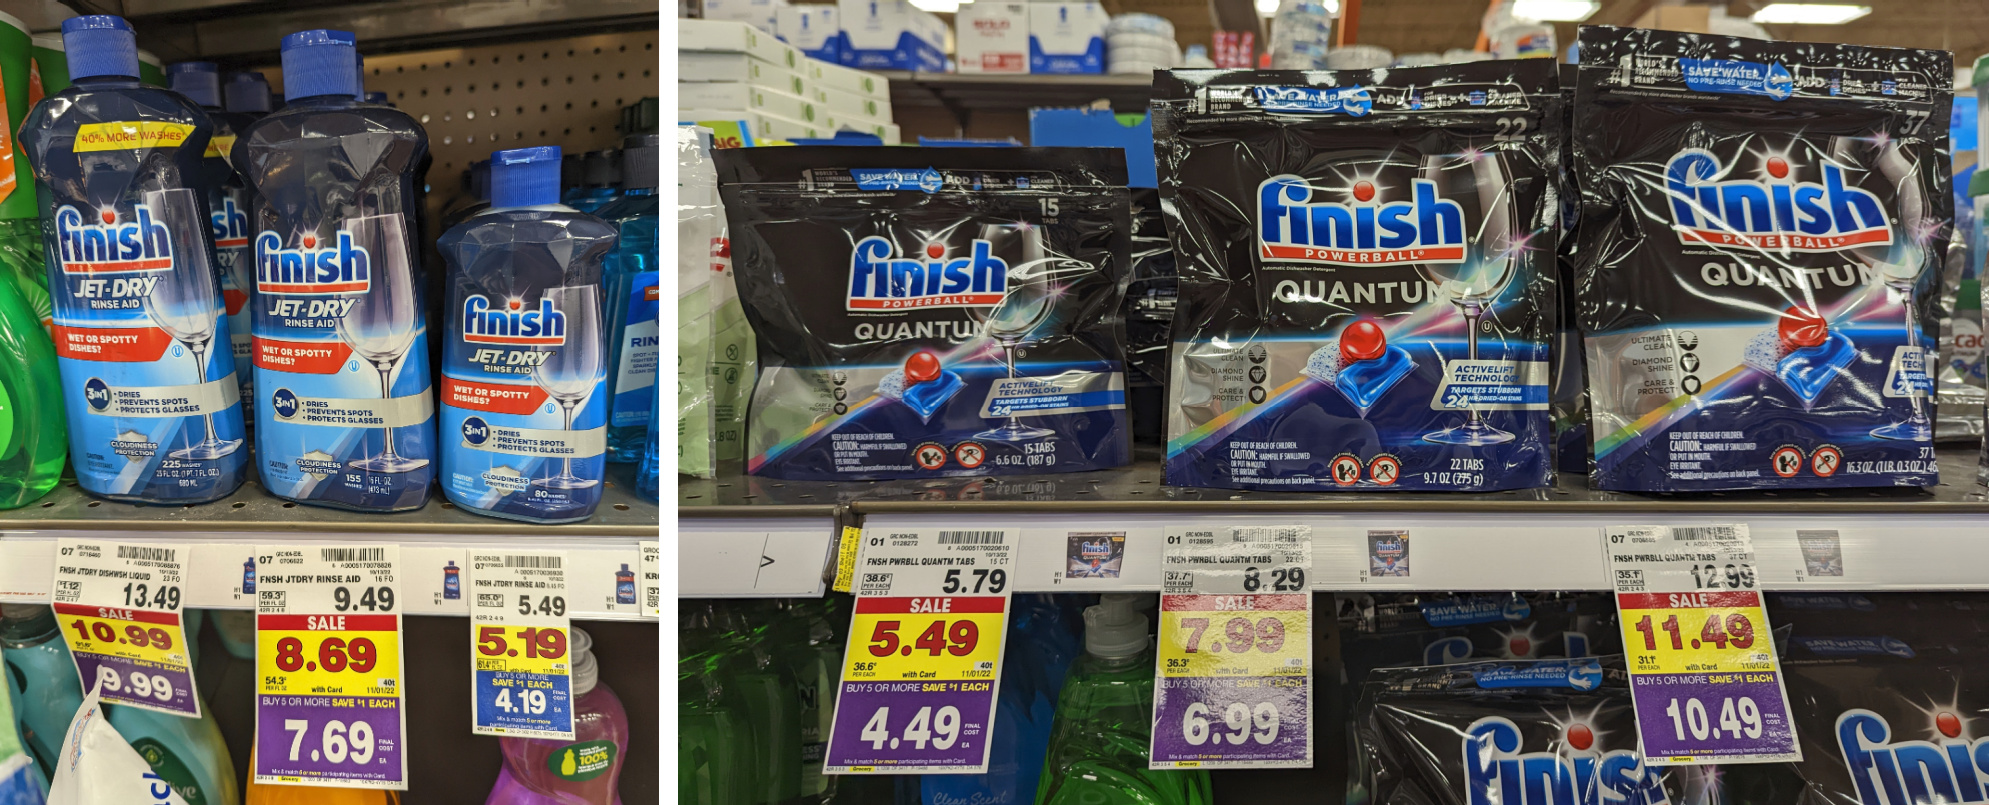 Finish Jet Dry Or Quantum Dishwasher Detergent As Low As $1.19 At Kroger -  iHeartKroger